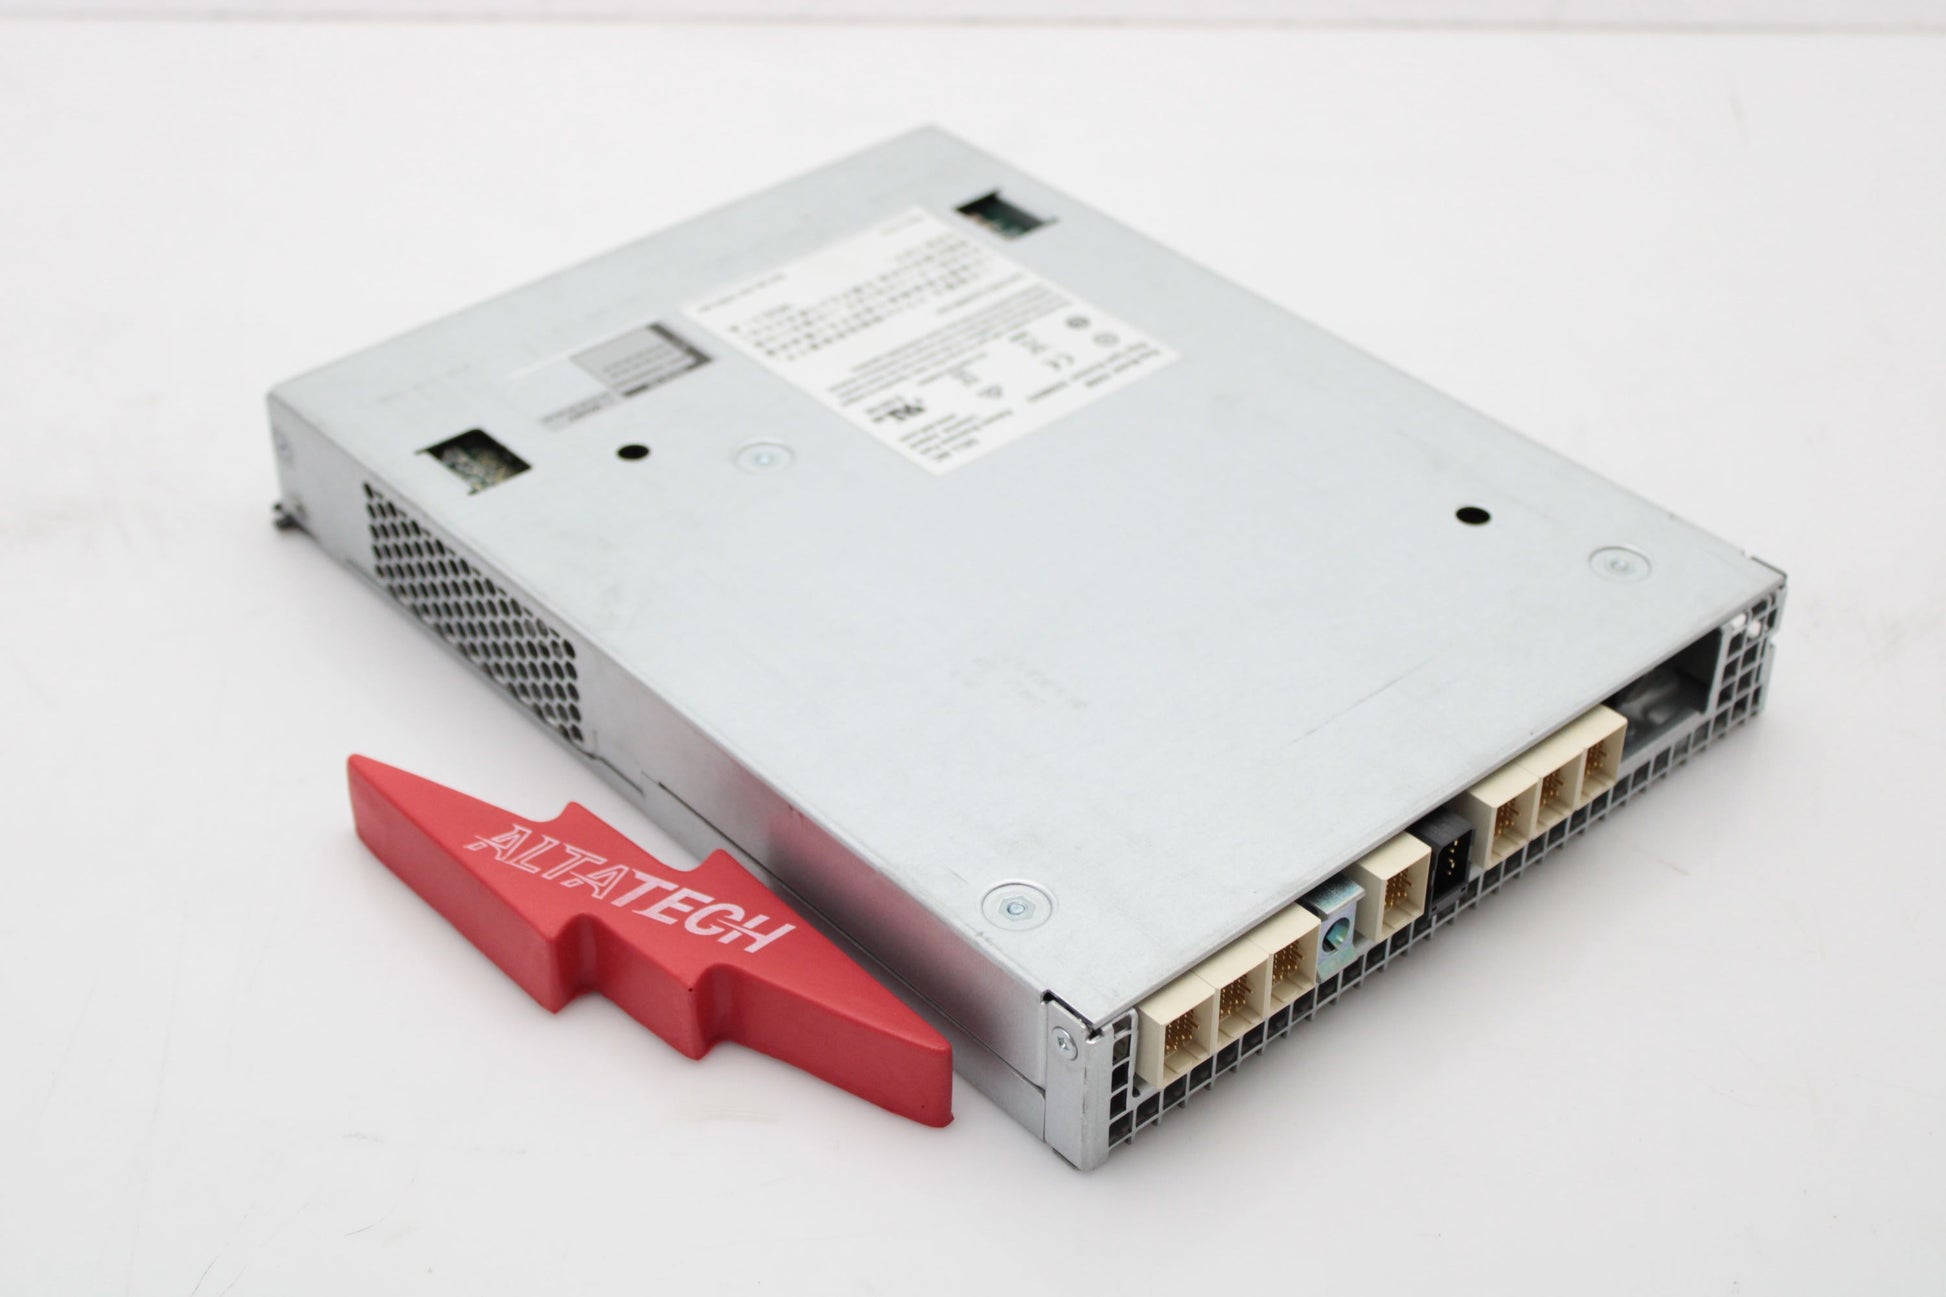 Dell 70-0425 EqualLogic Type 15 iSCSI Array Controller, Used